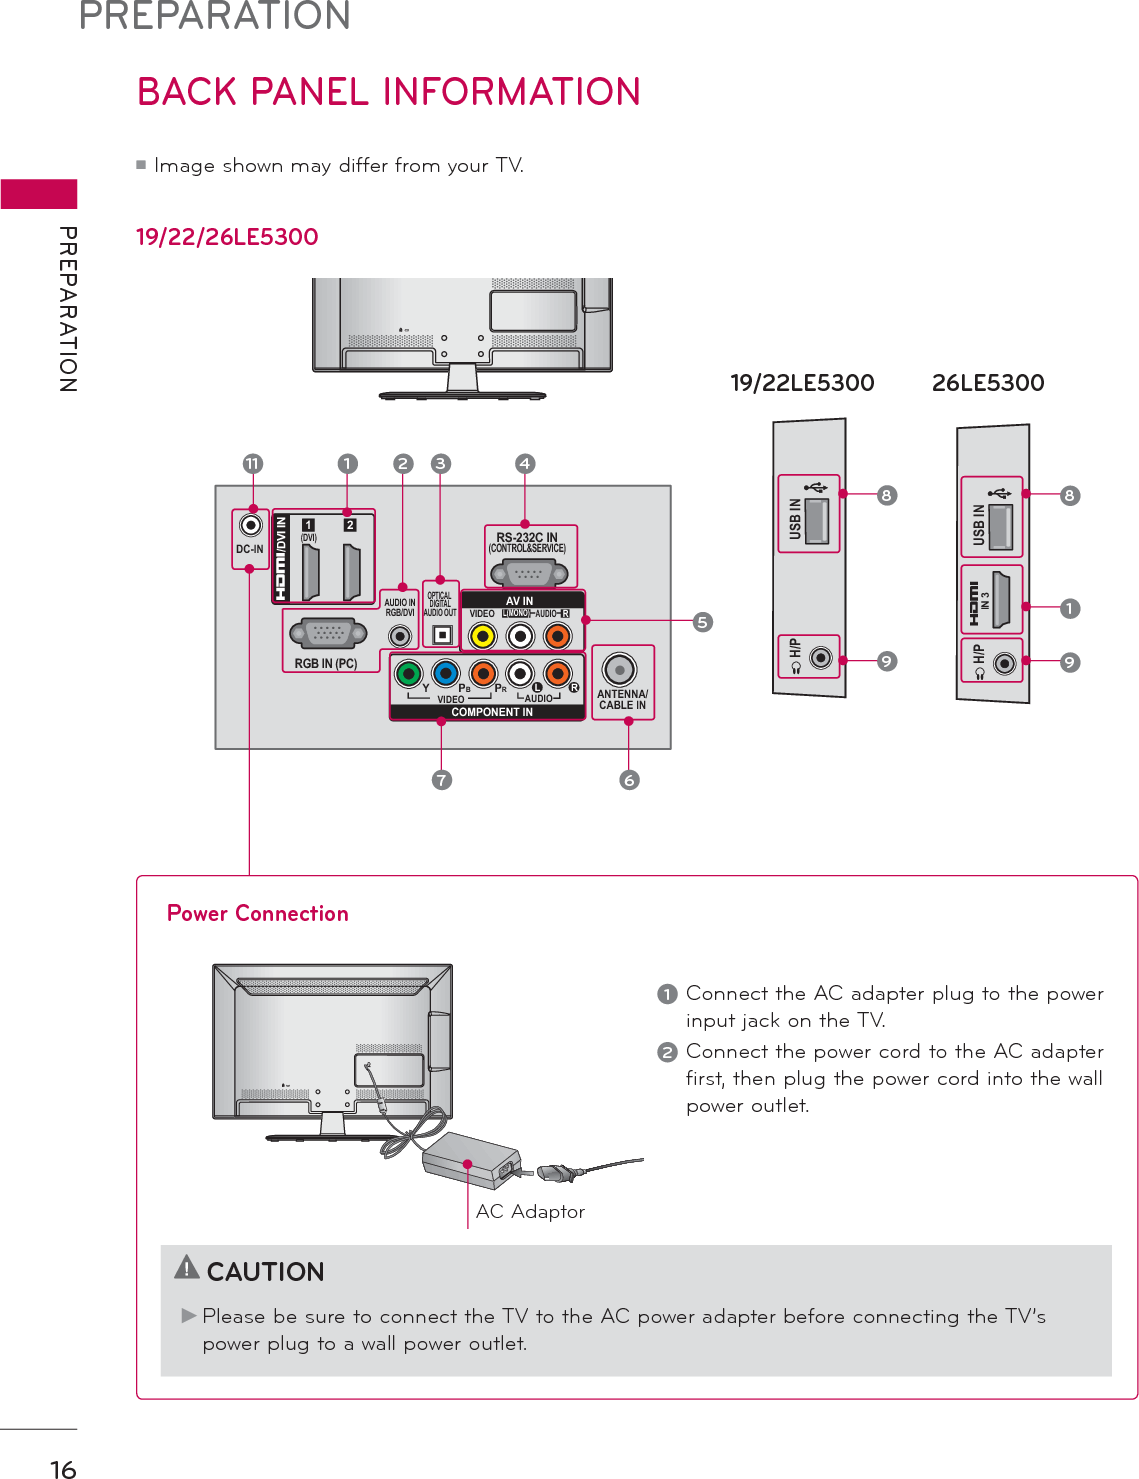 PREPARATIONPREPARATION16BACK PANEL INFORMATION᫶Image shown may differ from your TV.19/22/26LE530019/22LE5300 26LE5300H/P USB INH/P USB ININ 388919ANTENNA/CABLE INDC-INRGB IN (PC)AUDIO INRGB/DVI(DVI)OPTICAL DIGITALAUDIO OUT/DVI INVIDEOAUDIOL(MONO)RVIDEO AUDIOYPBPRL RCOMPONENT INAV INRS-232C IN(CONTROL&amp;SERVICE)1 211 1 32 4567Power Connection1Connect the AC adapter plug to the power input jack on the TV.2Connect the power cord to the AC adapter first, then plug the power cord into the wall power outlet.CAUTIONŹ Please be sure to connect the TV to the AC power adapter before connecting the TV’s power plug to a wall power outlet.DC INDC INAC Adaptor